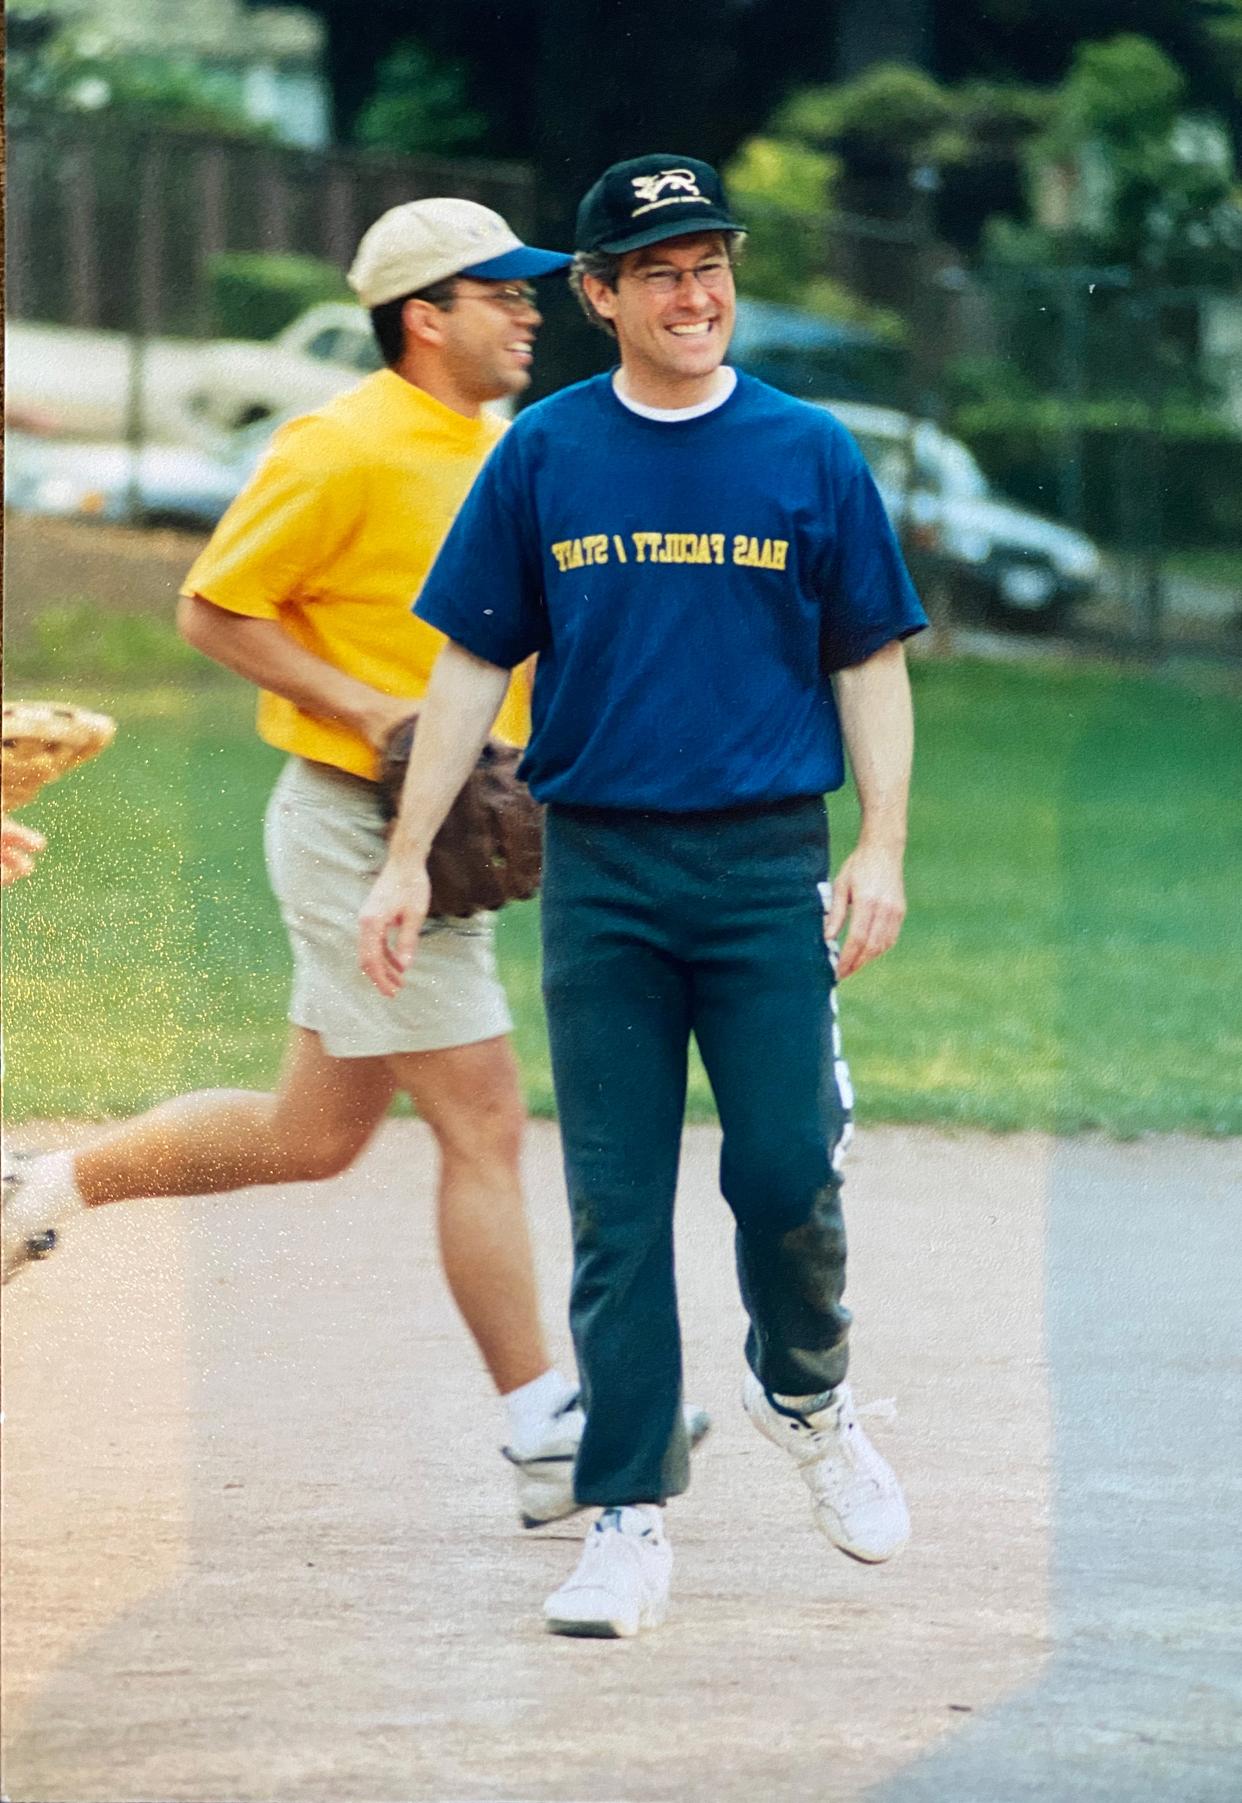 Two men on a softball field in a photo from the 90s